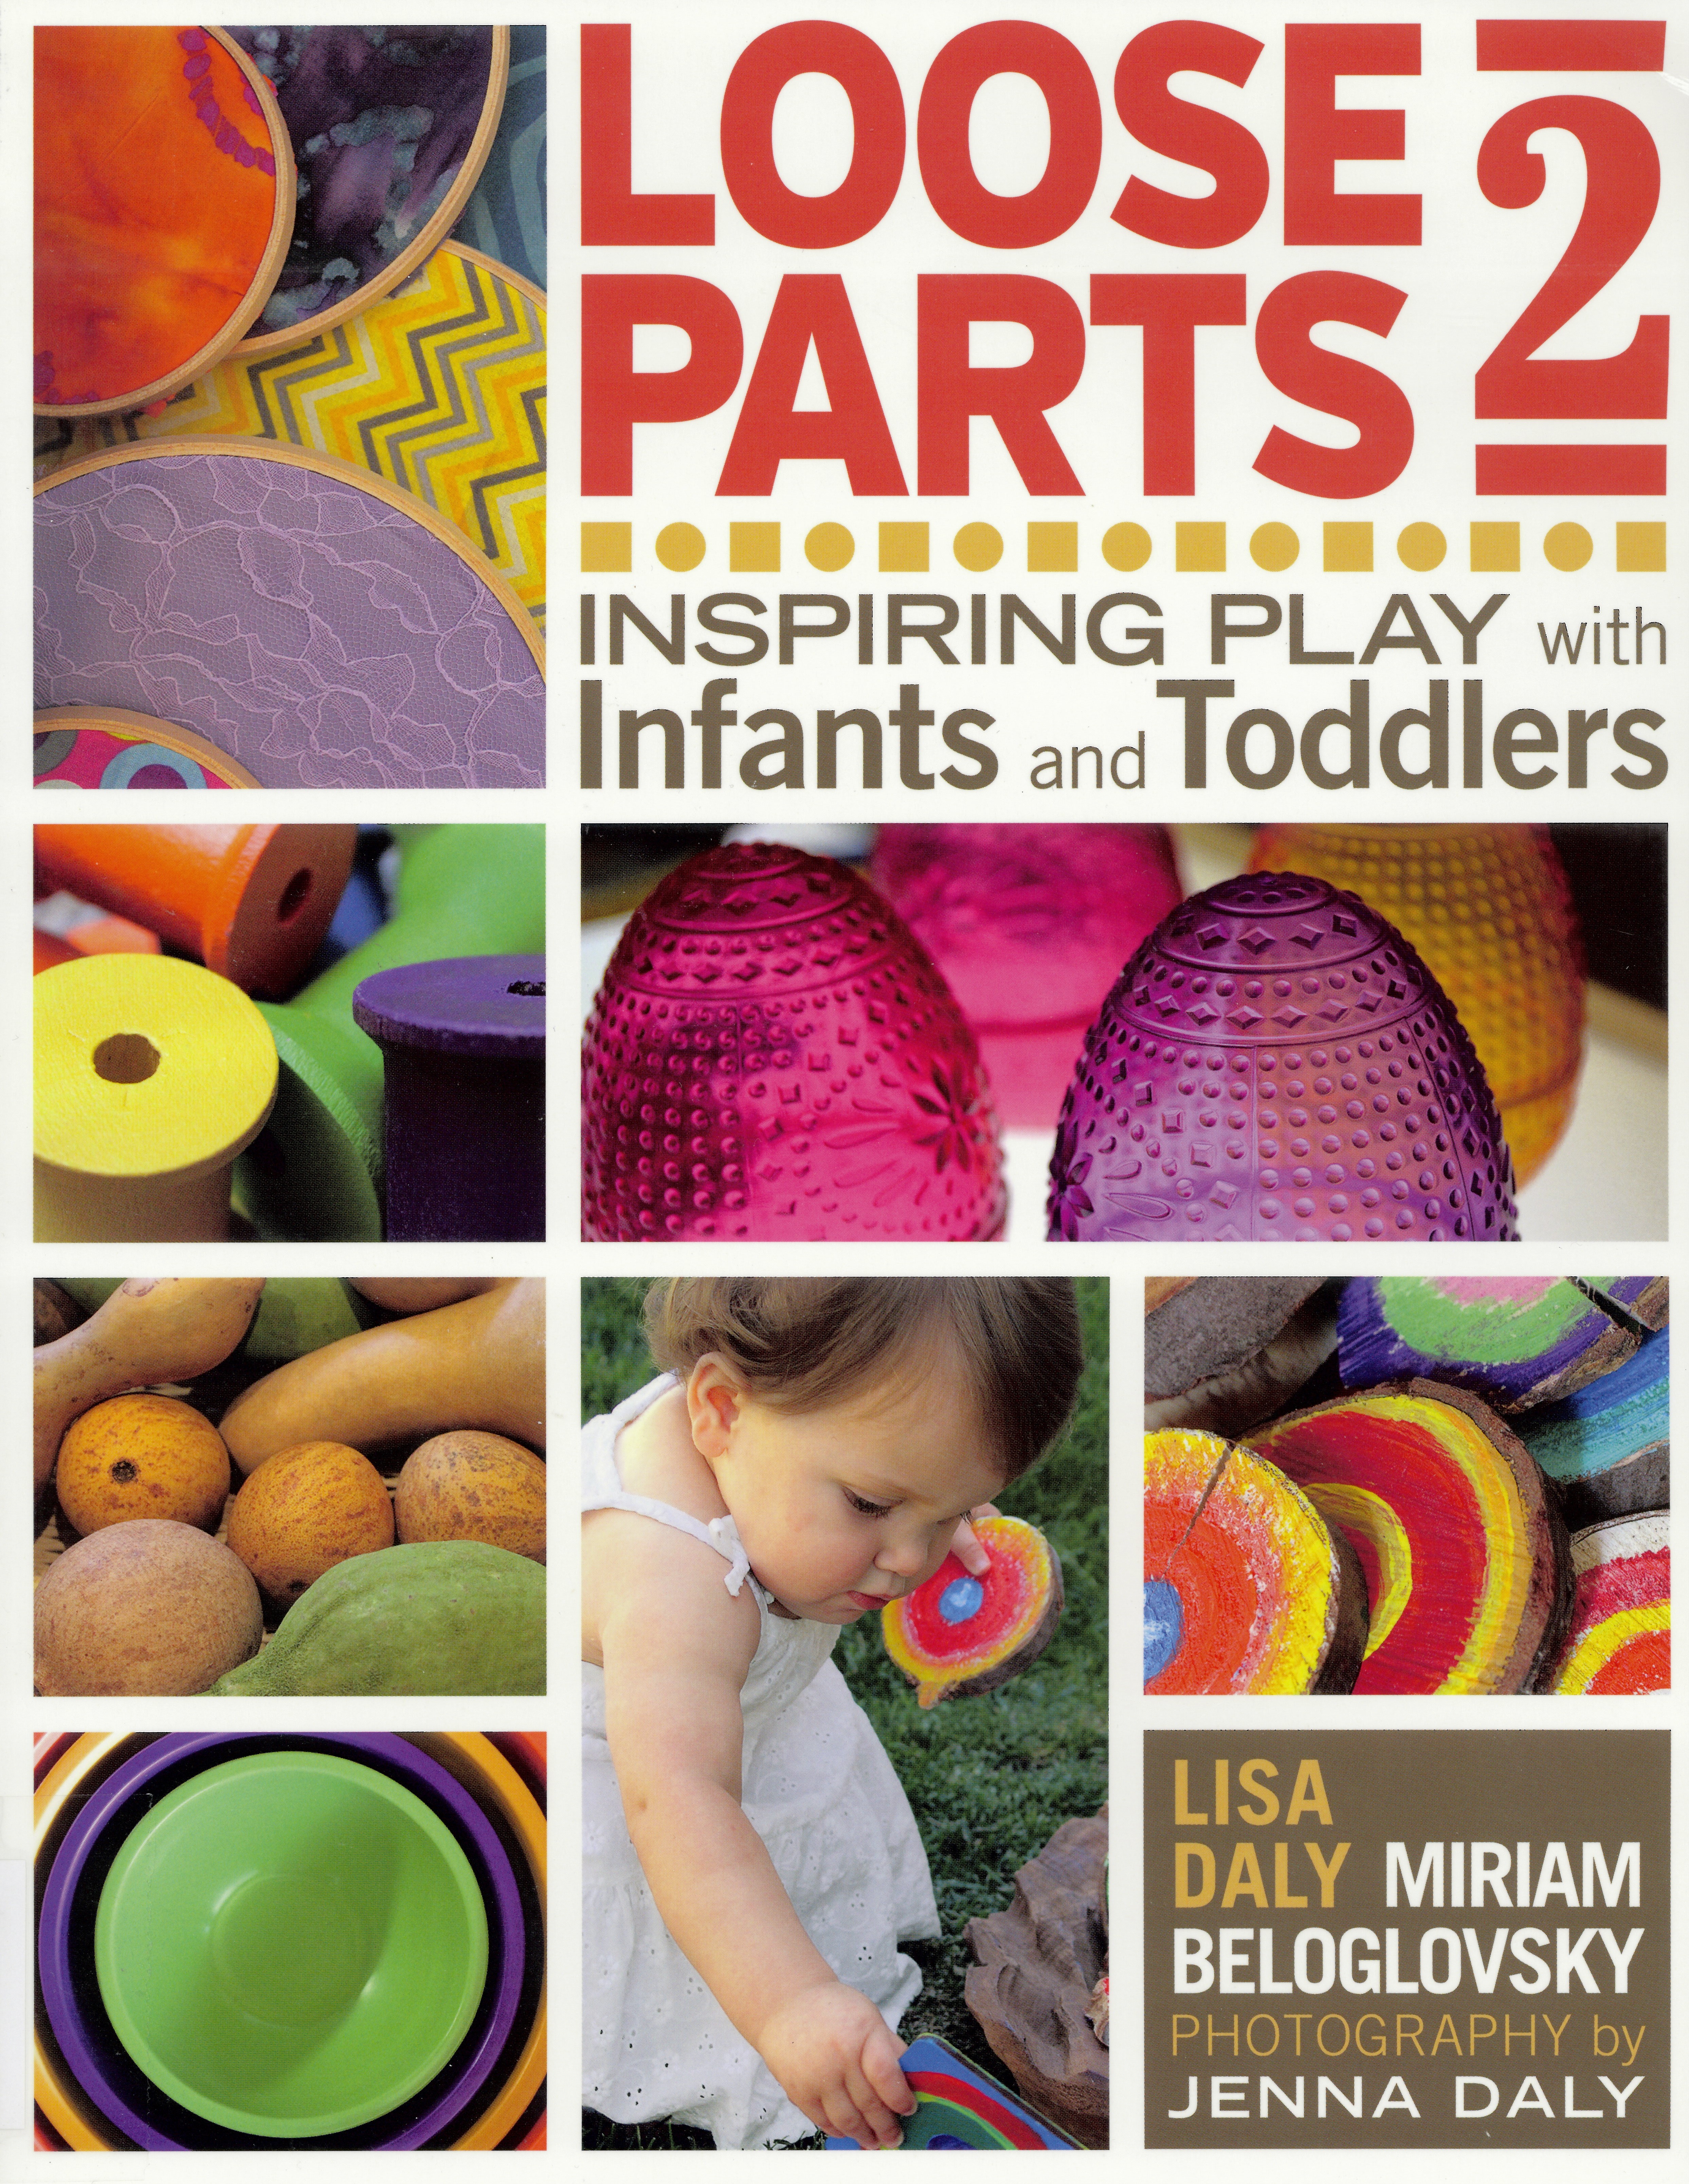 Loose parts 2 : inspiring play with infants and toddlers